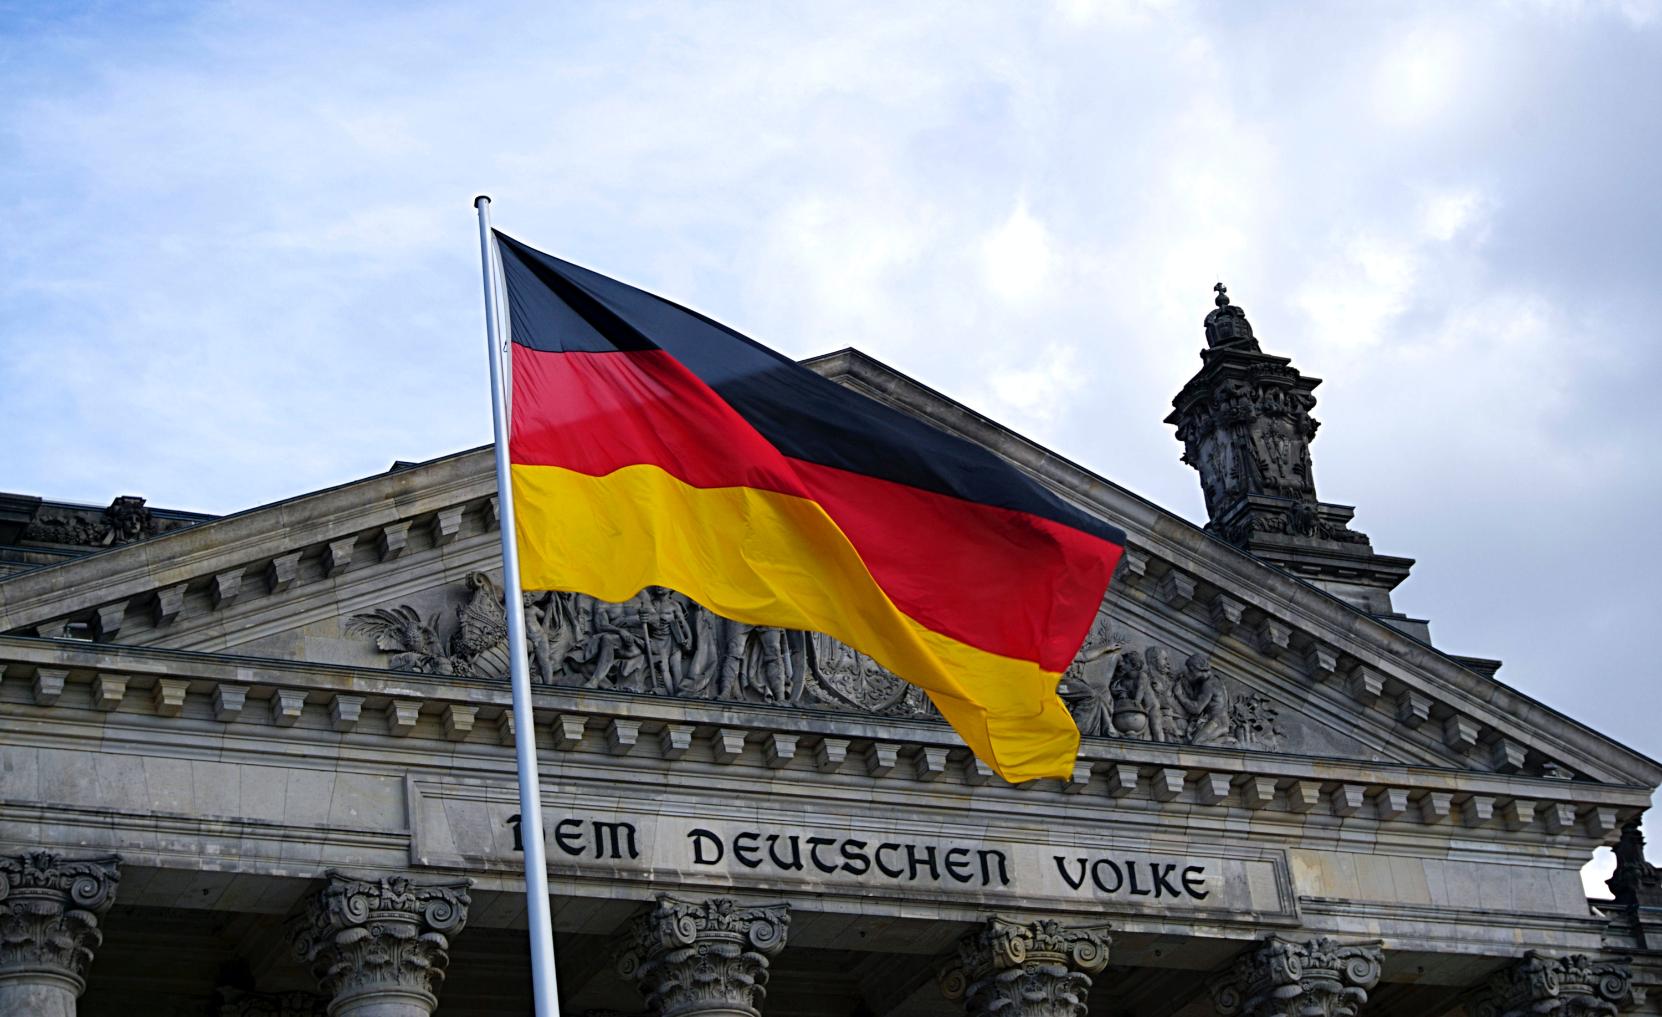 The German flag on a flag pole in front of a historic building.